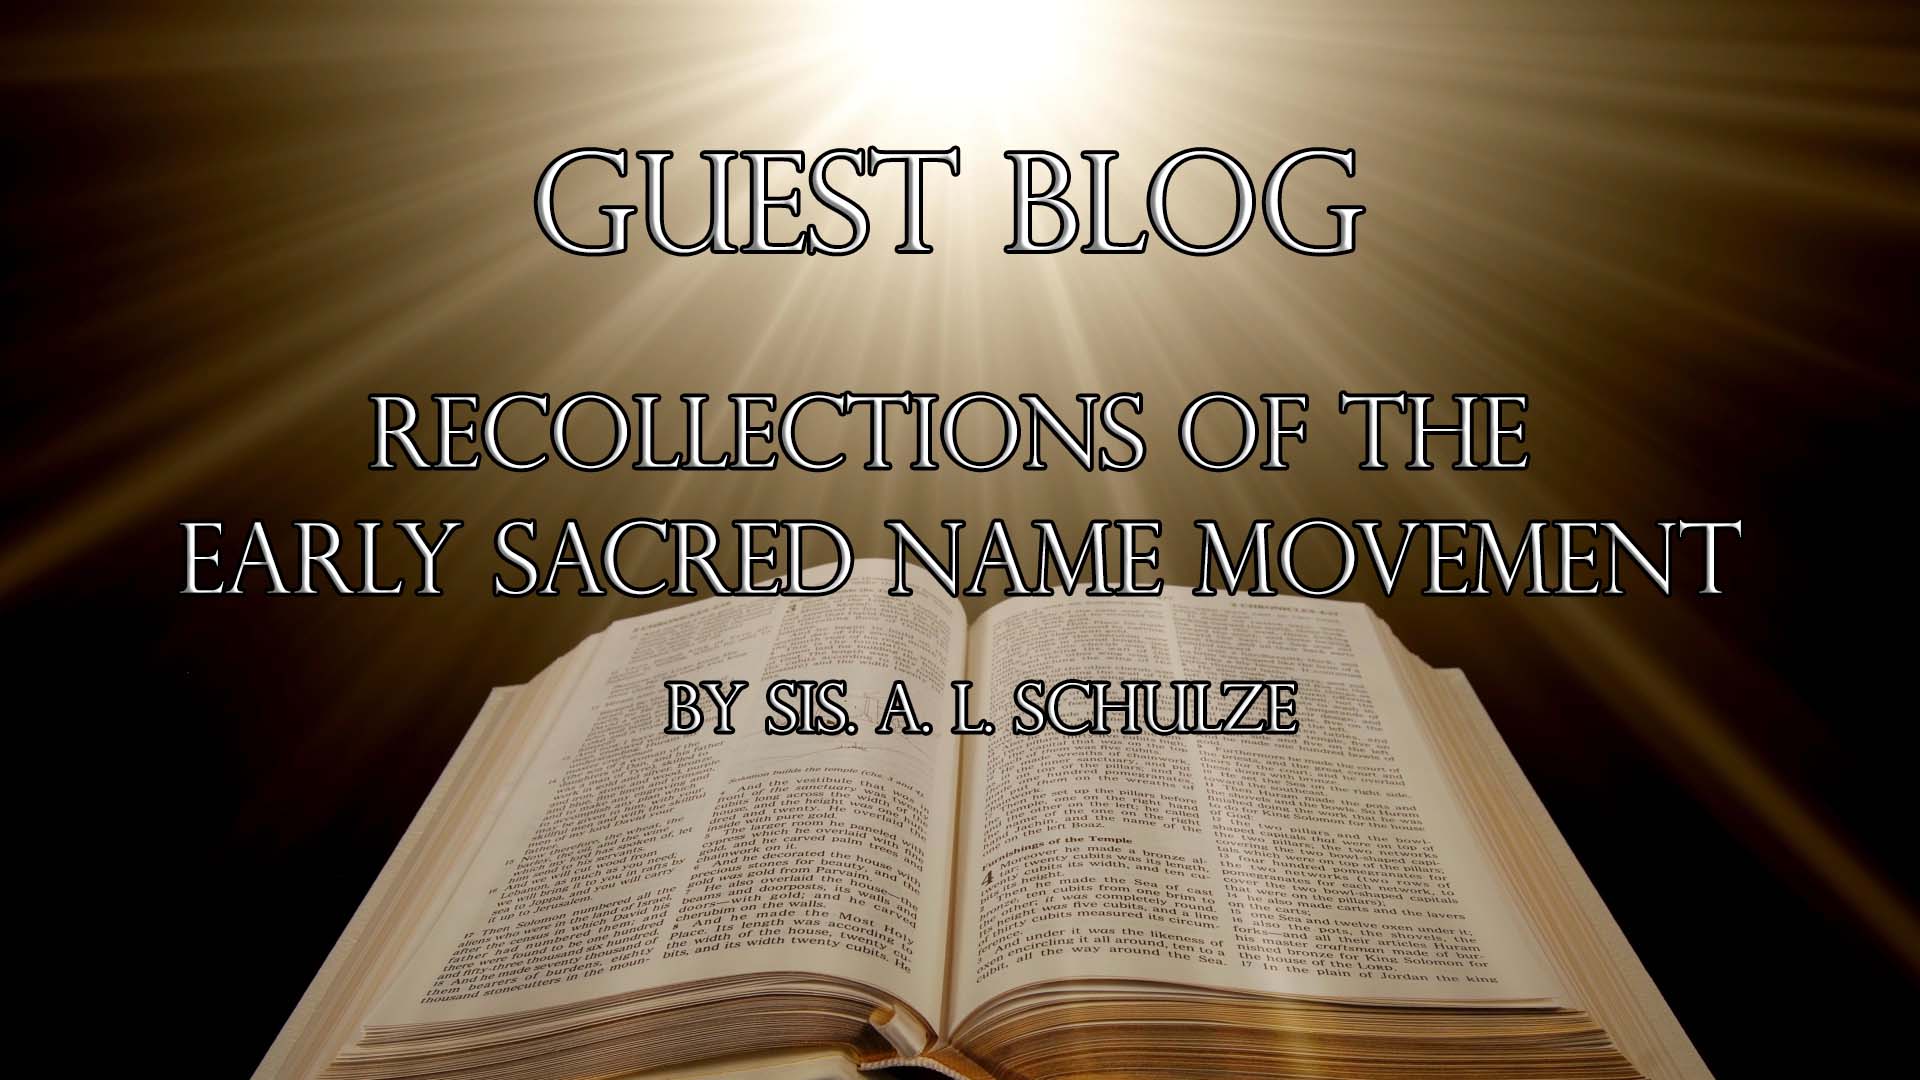 Early Sacred Name Movement by Sis. A.L. Schulze